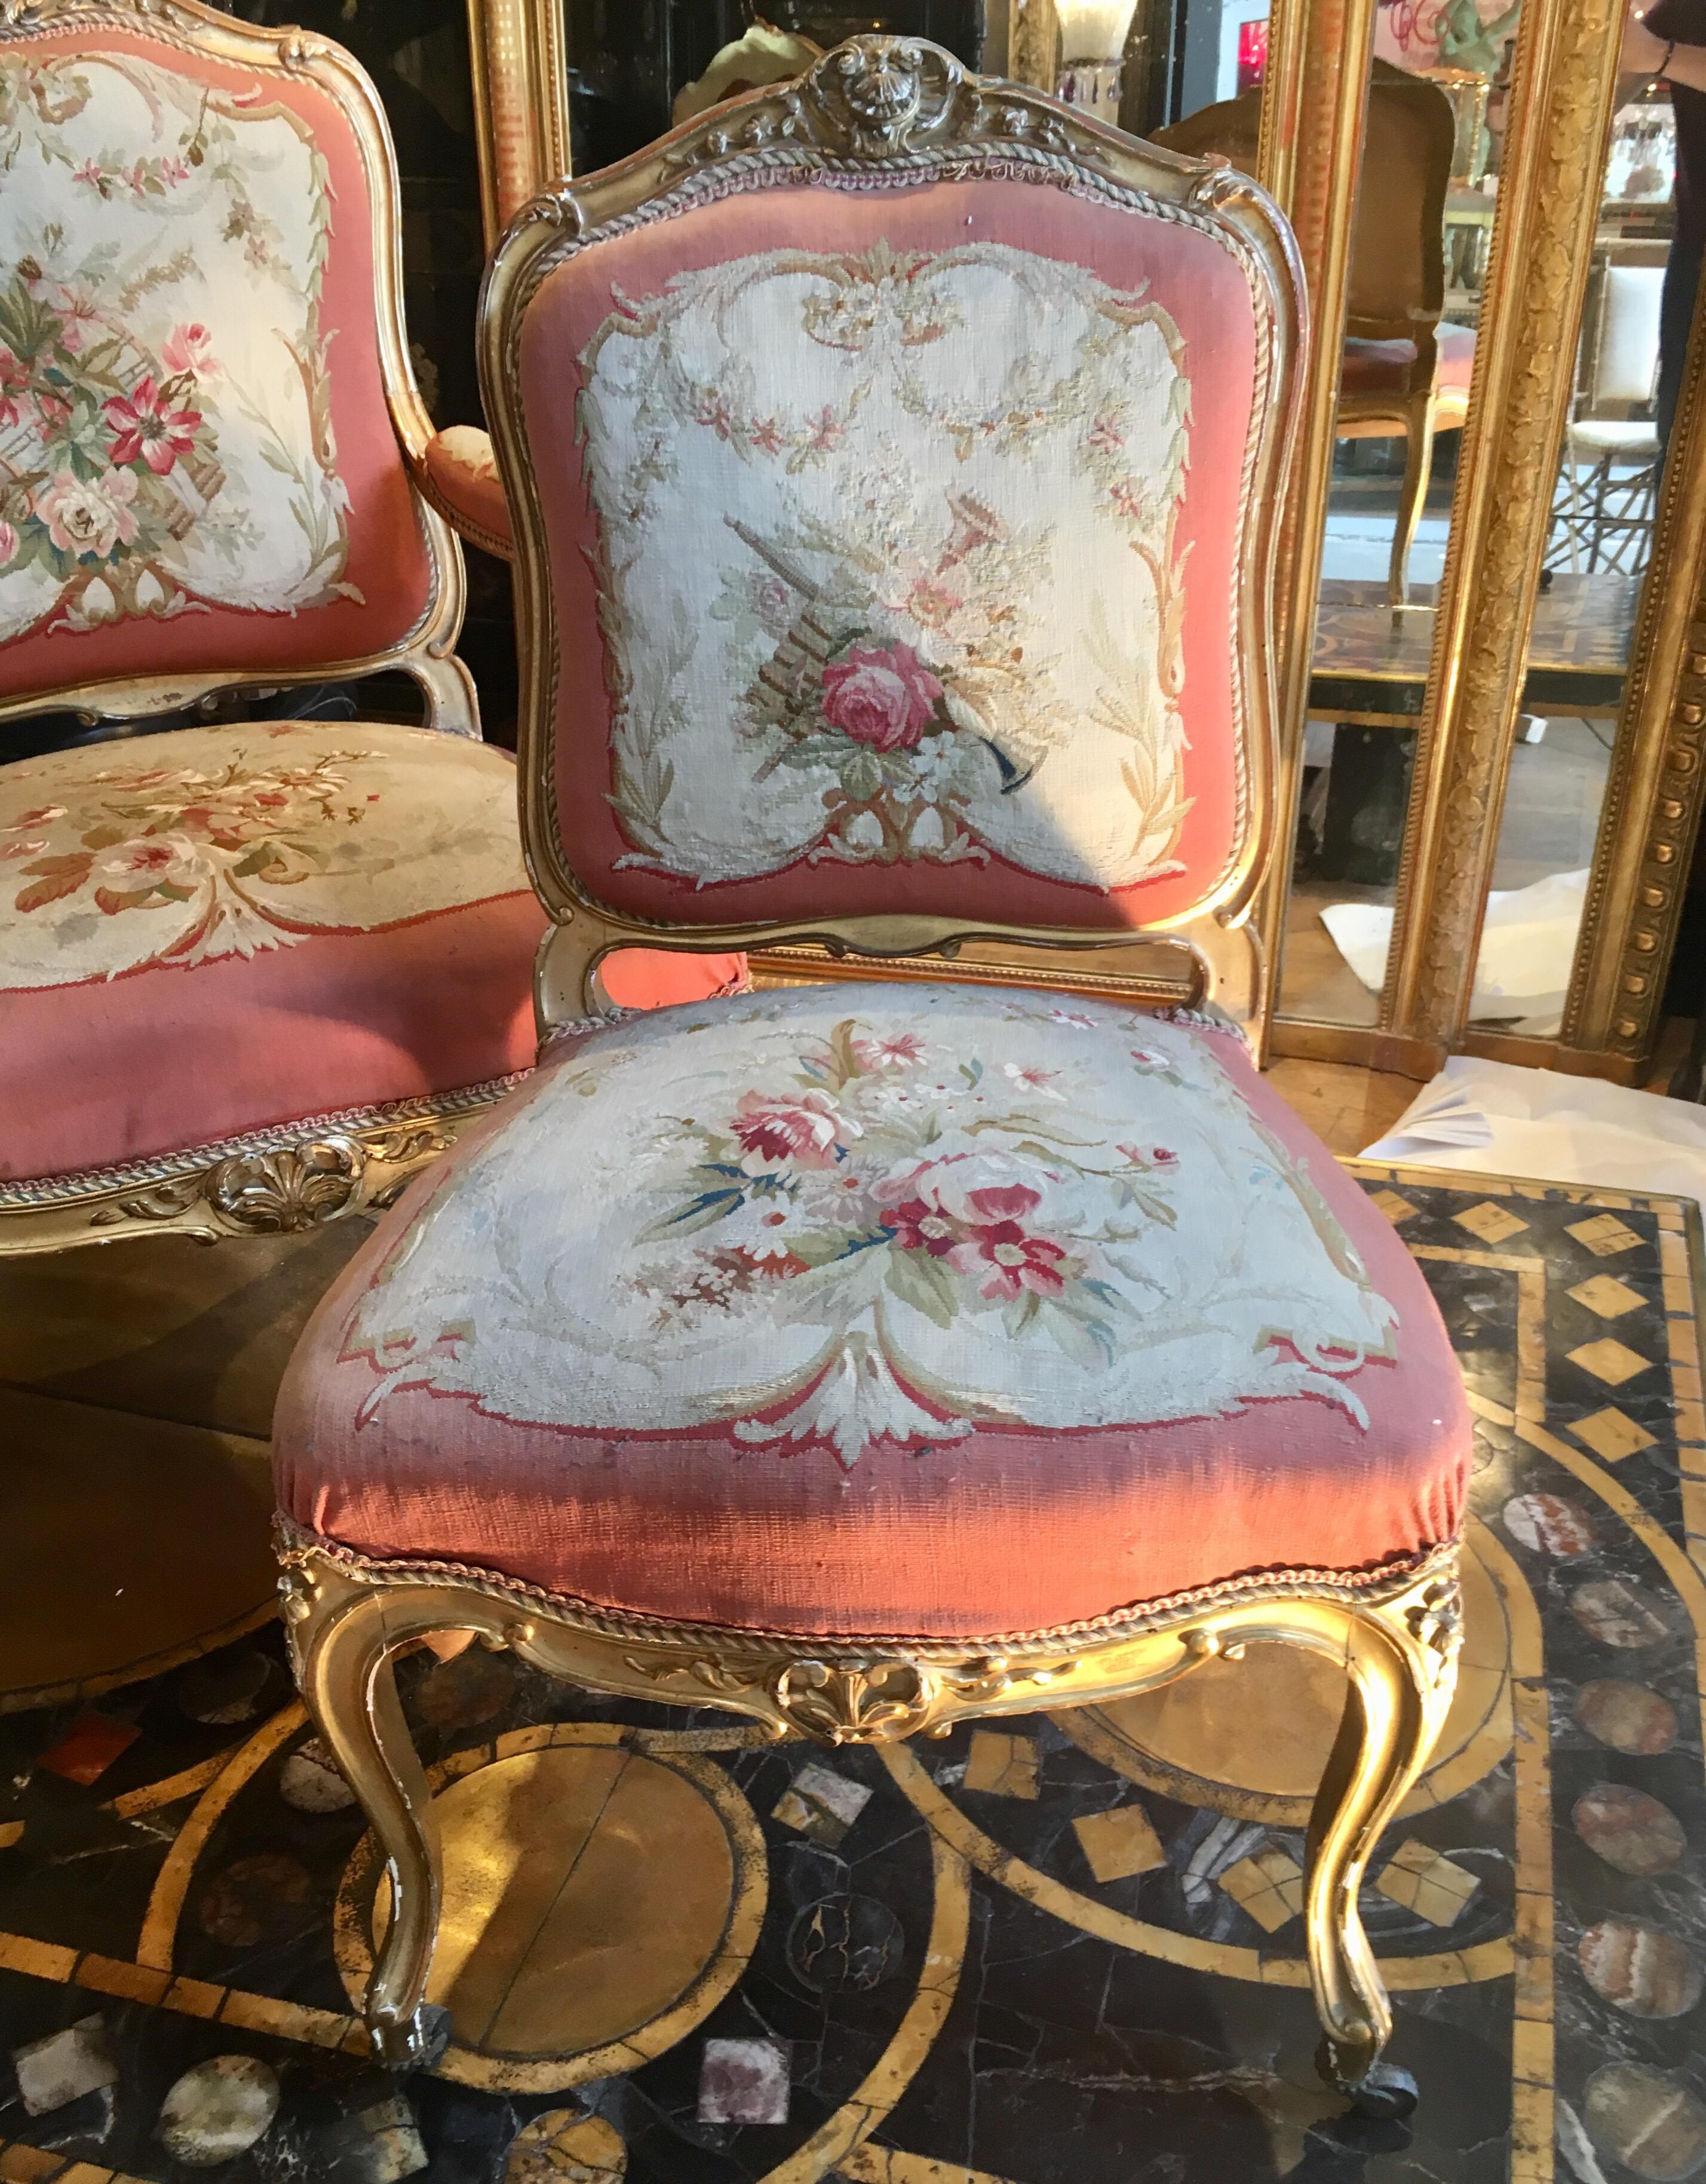 Beautiful living room set with two chairs and two armchairs, 19th century, circa 1860, Napoleon III style in Aubusson tapestry on the theme of music.
Flowers, music instruments, etc.
Very fresh color coral.
Carved and gilded wood.
Two wheels on